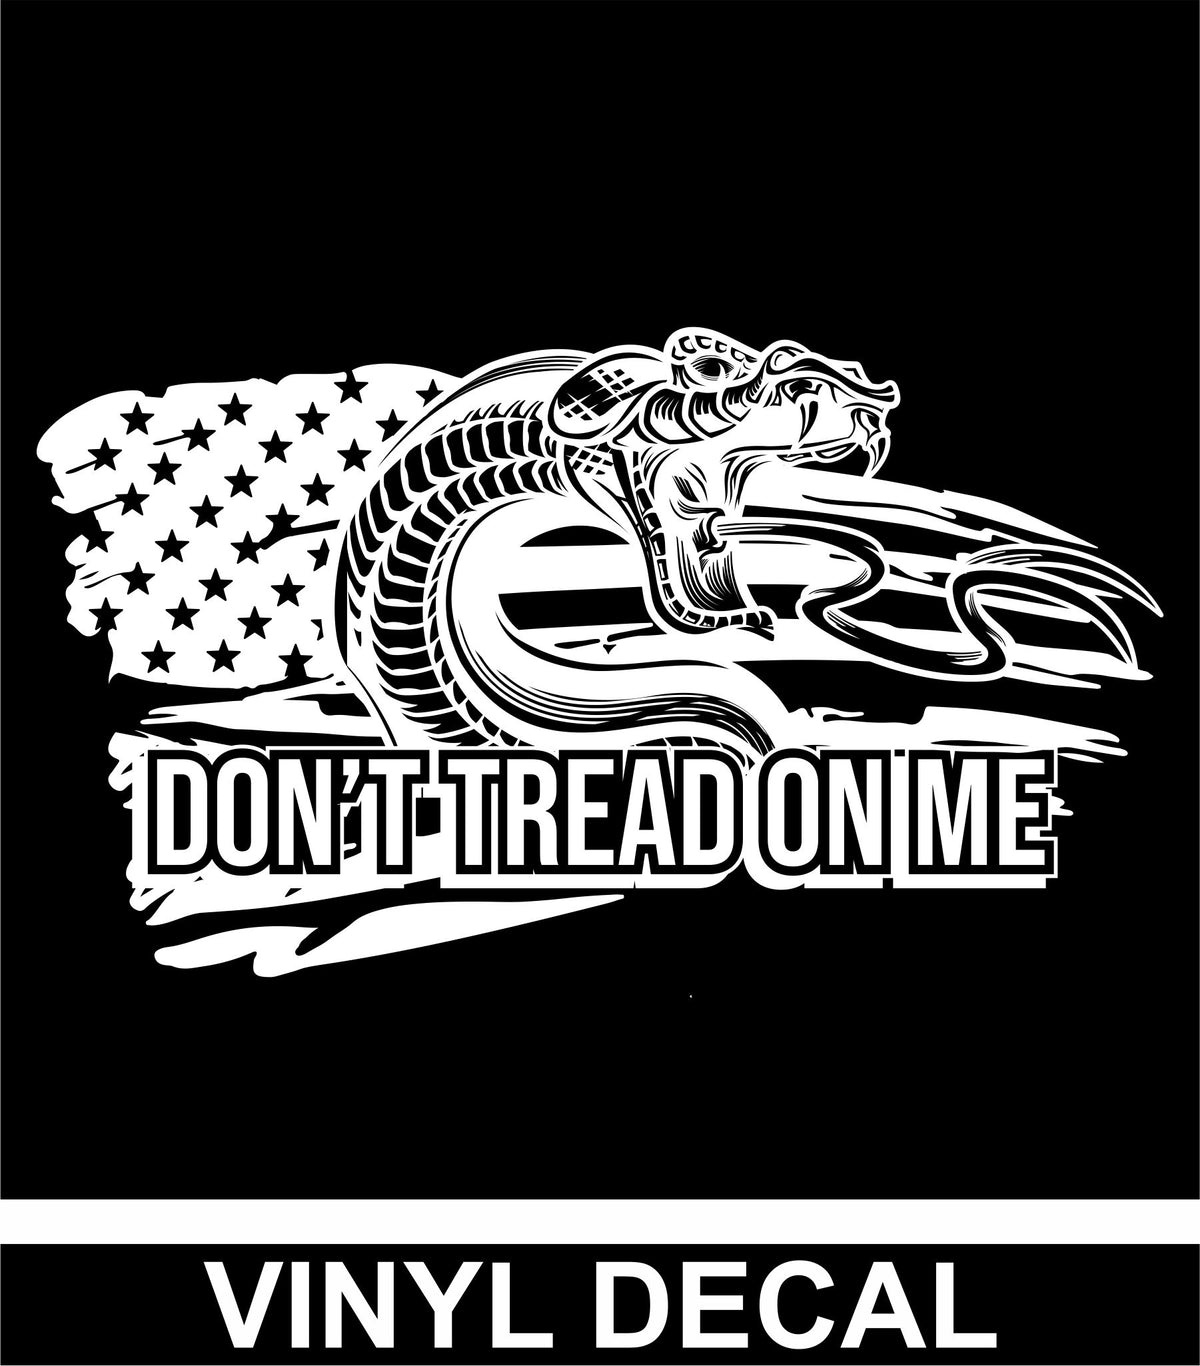 Don't Tread on Me - Tattered Flag - Vinyl Decal - Free Shipping